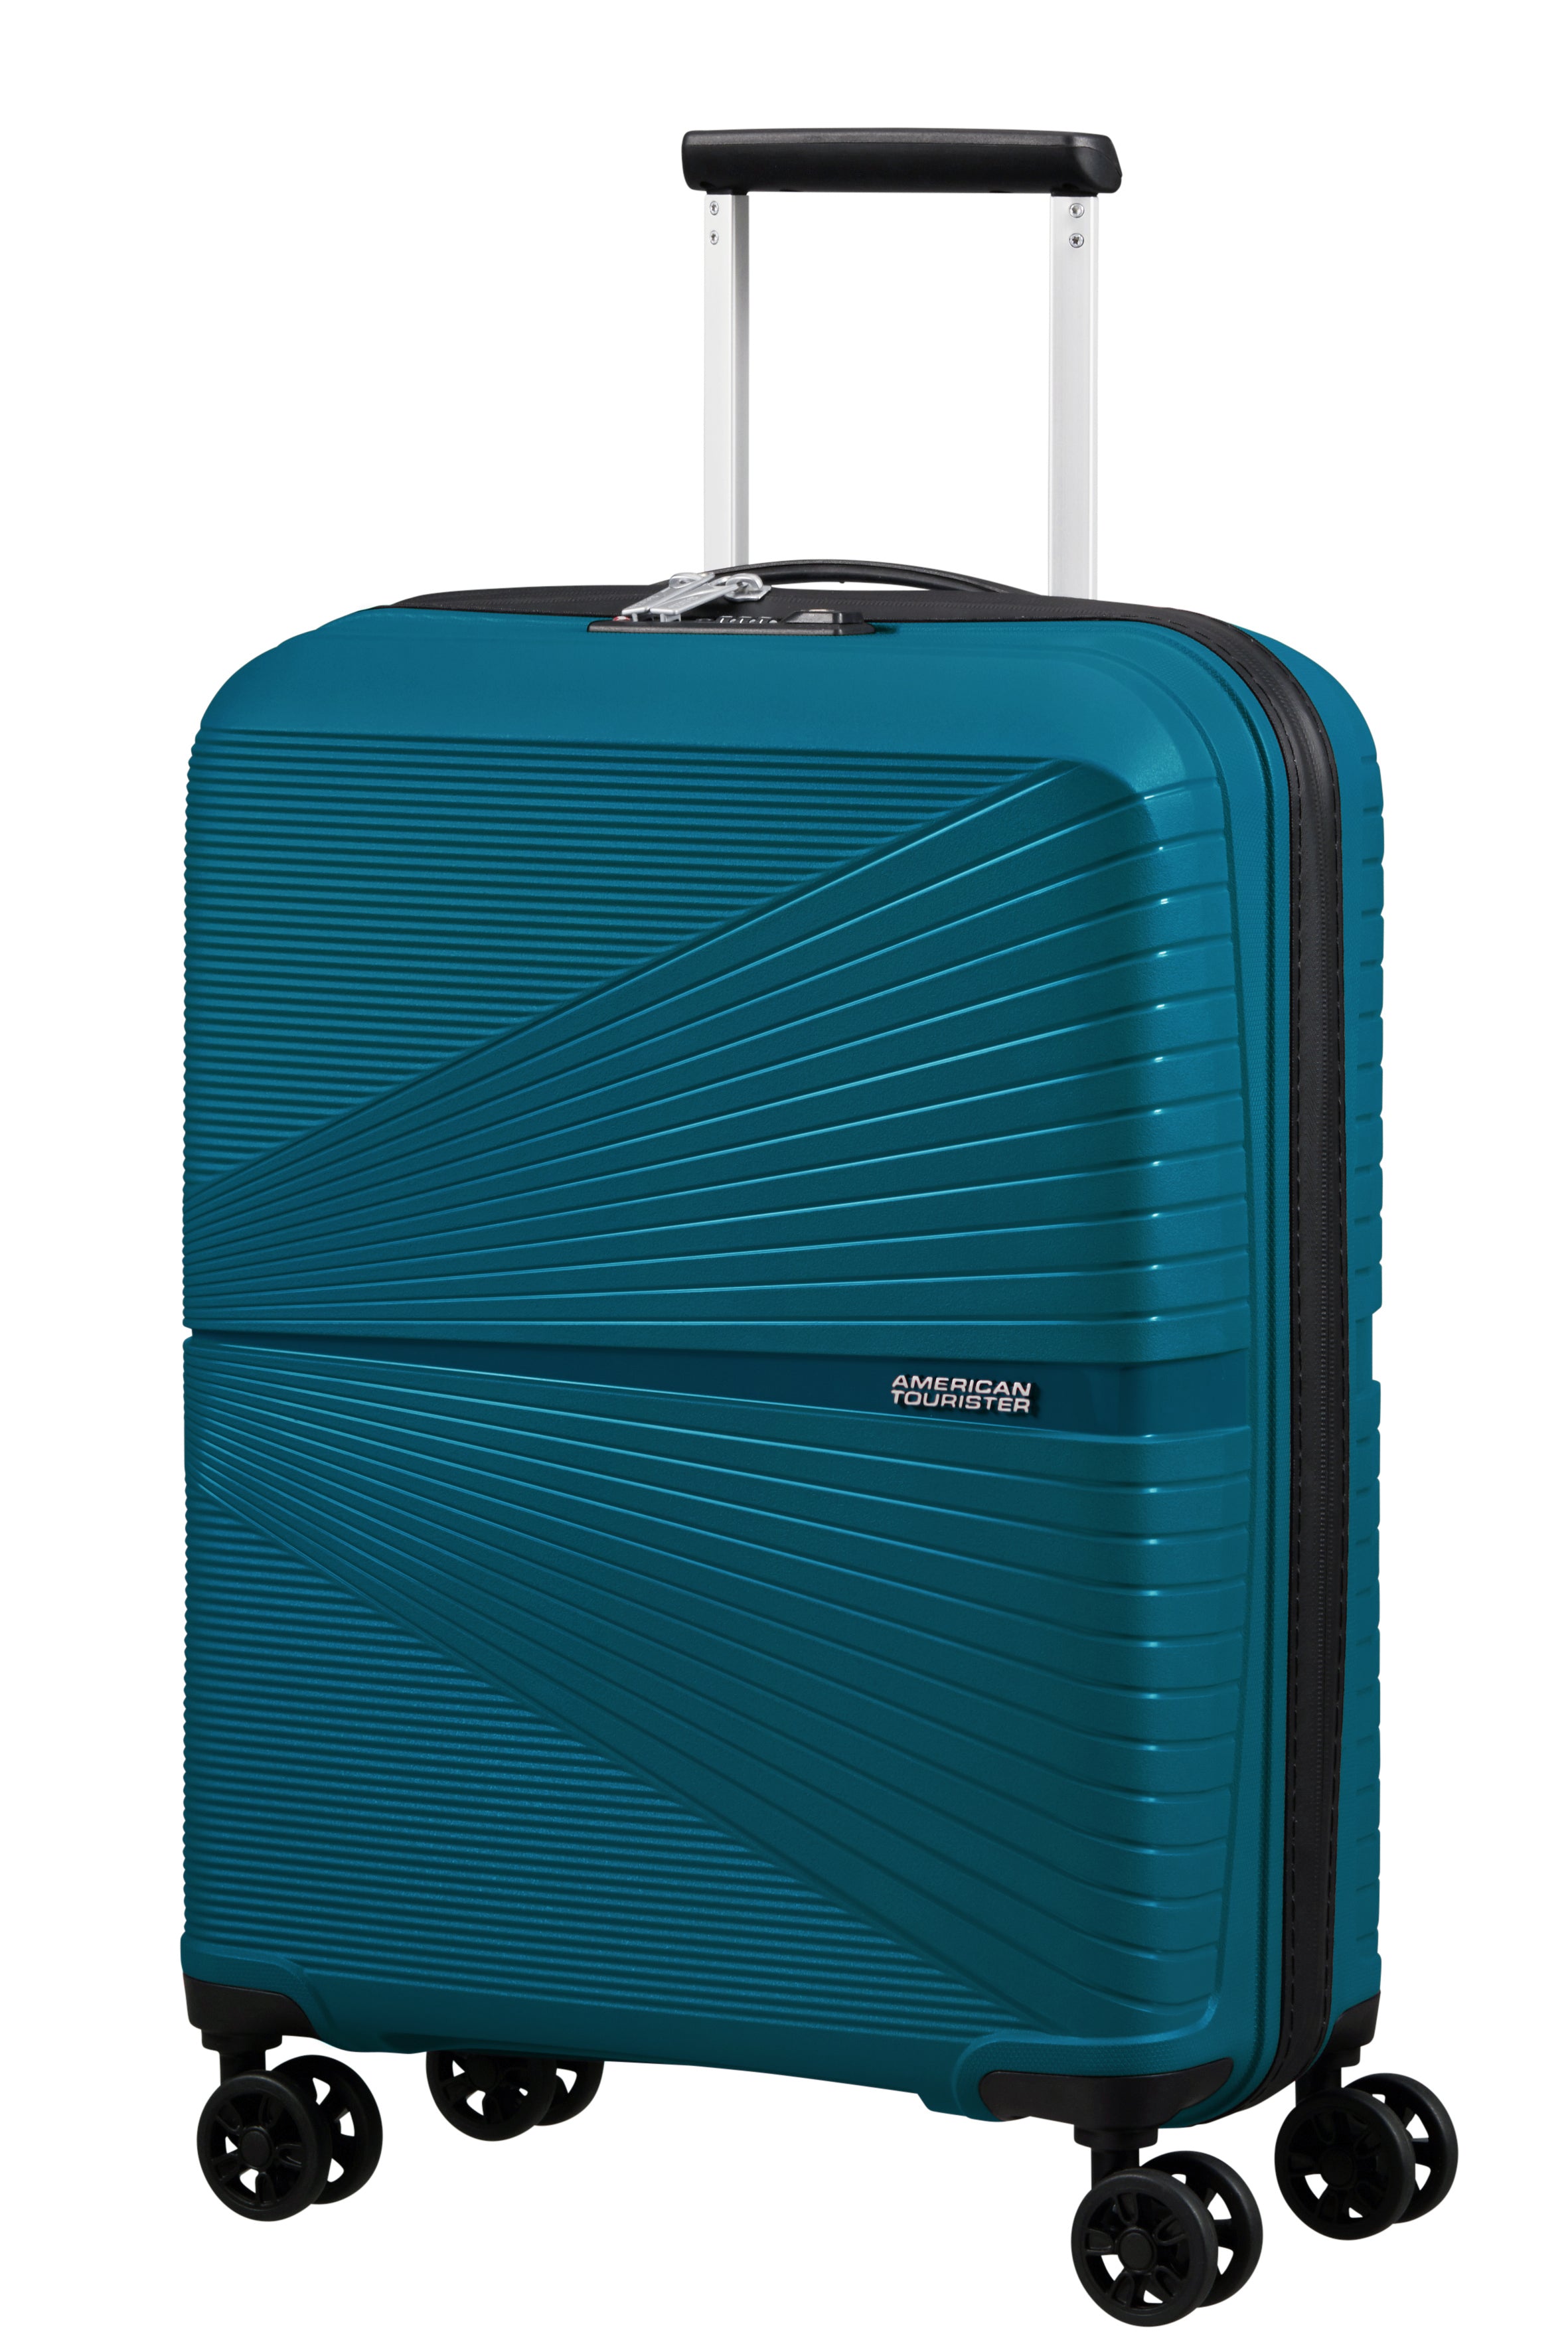 American Tourister - Airconic 55cm Small Suitcase - Deep Ocean